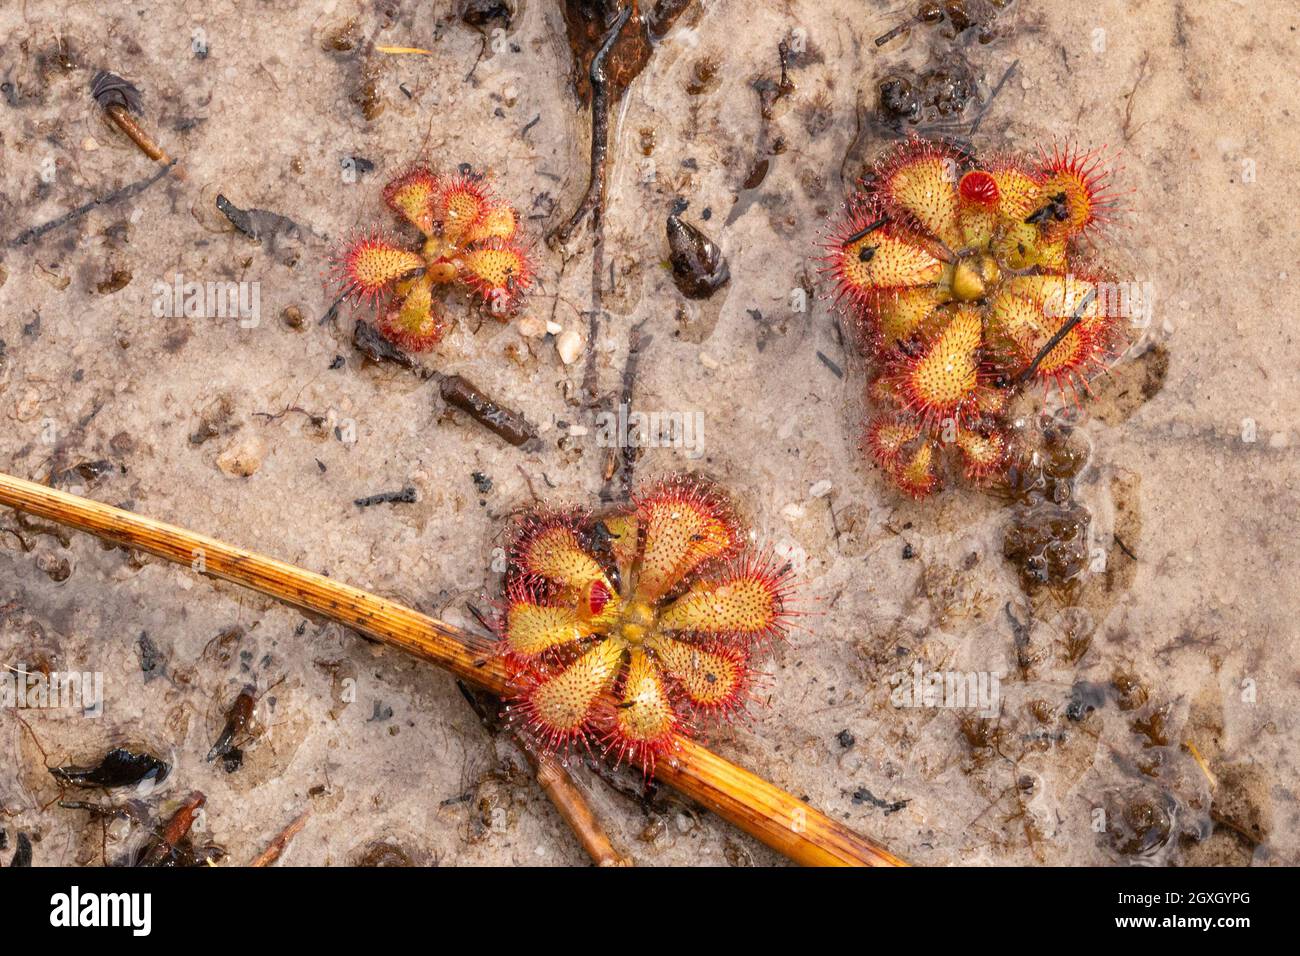 Some green rosettes of a Sundew (Drosera sp., a carnivorous plant) seen in natural habitat close to Barrydale in the Western Cape of South Africa Stock Photo